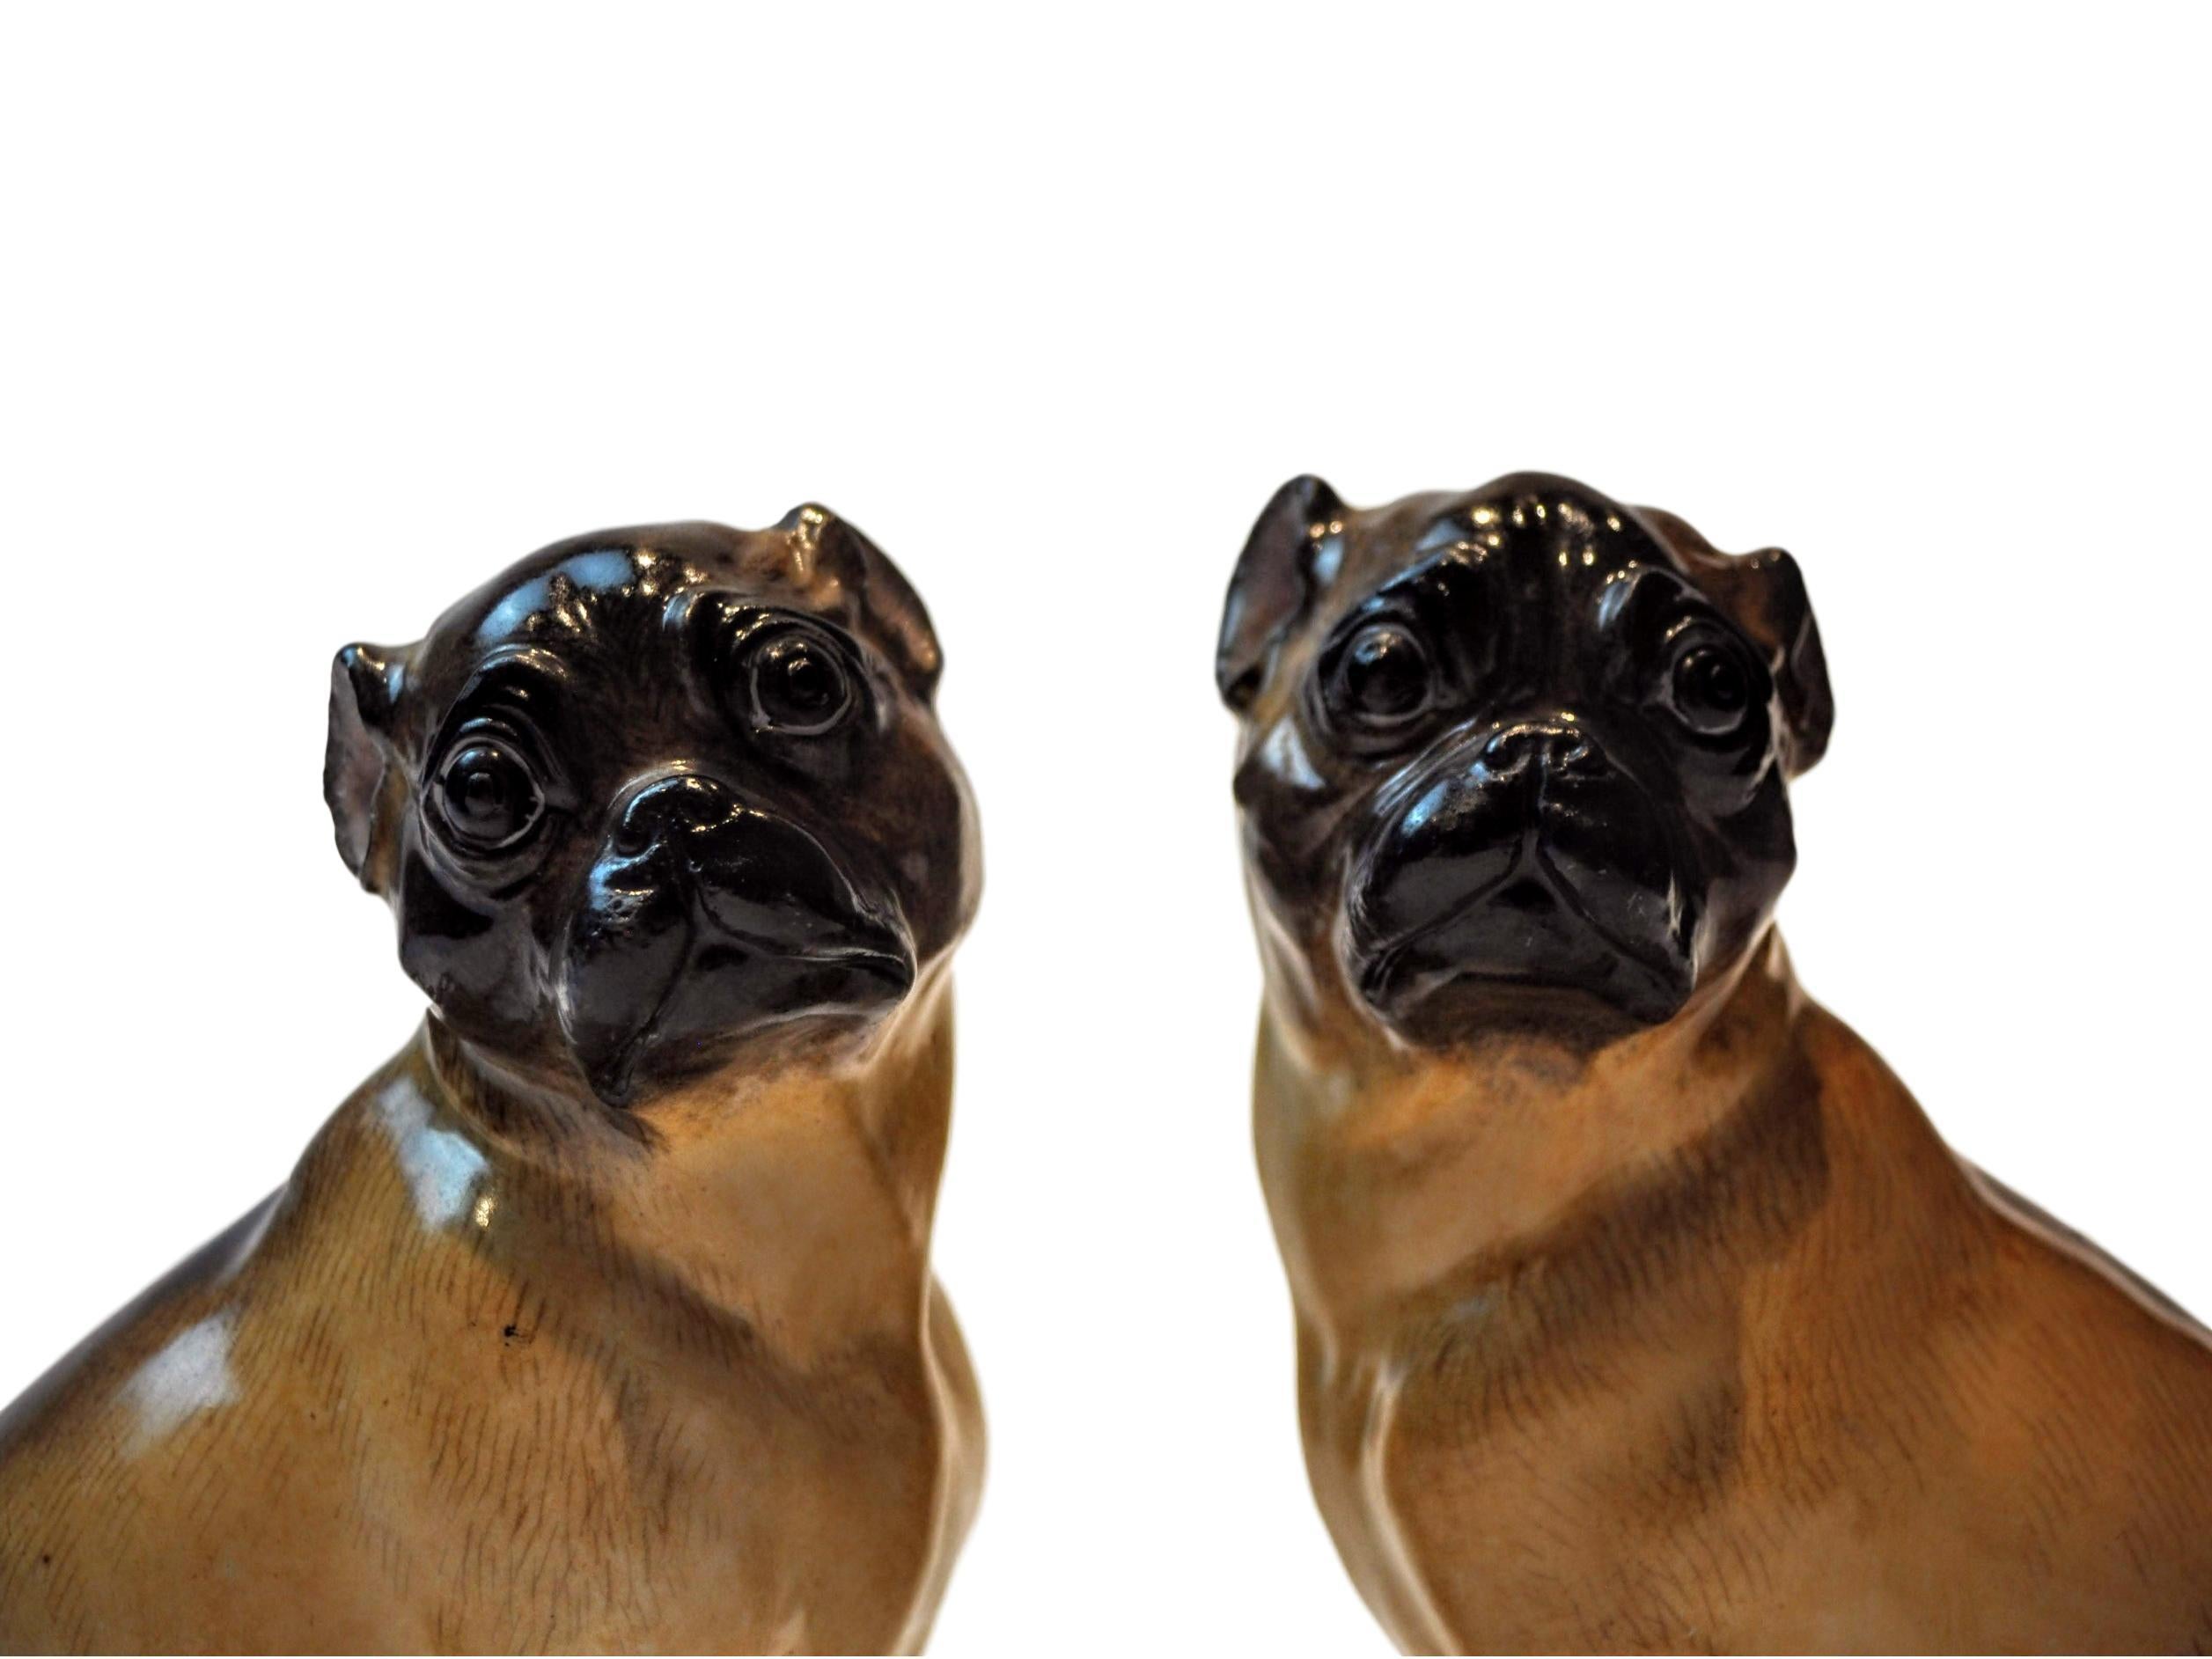 19th Century Pair of Meissen Porcelain Figures of Pug Dogs, Germany 1